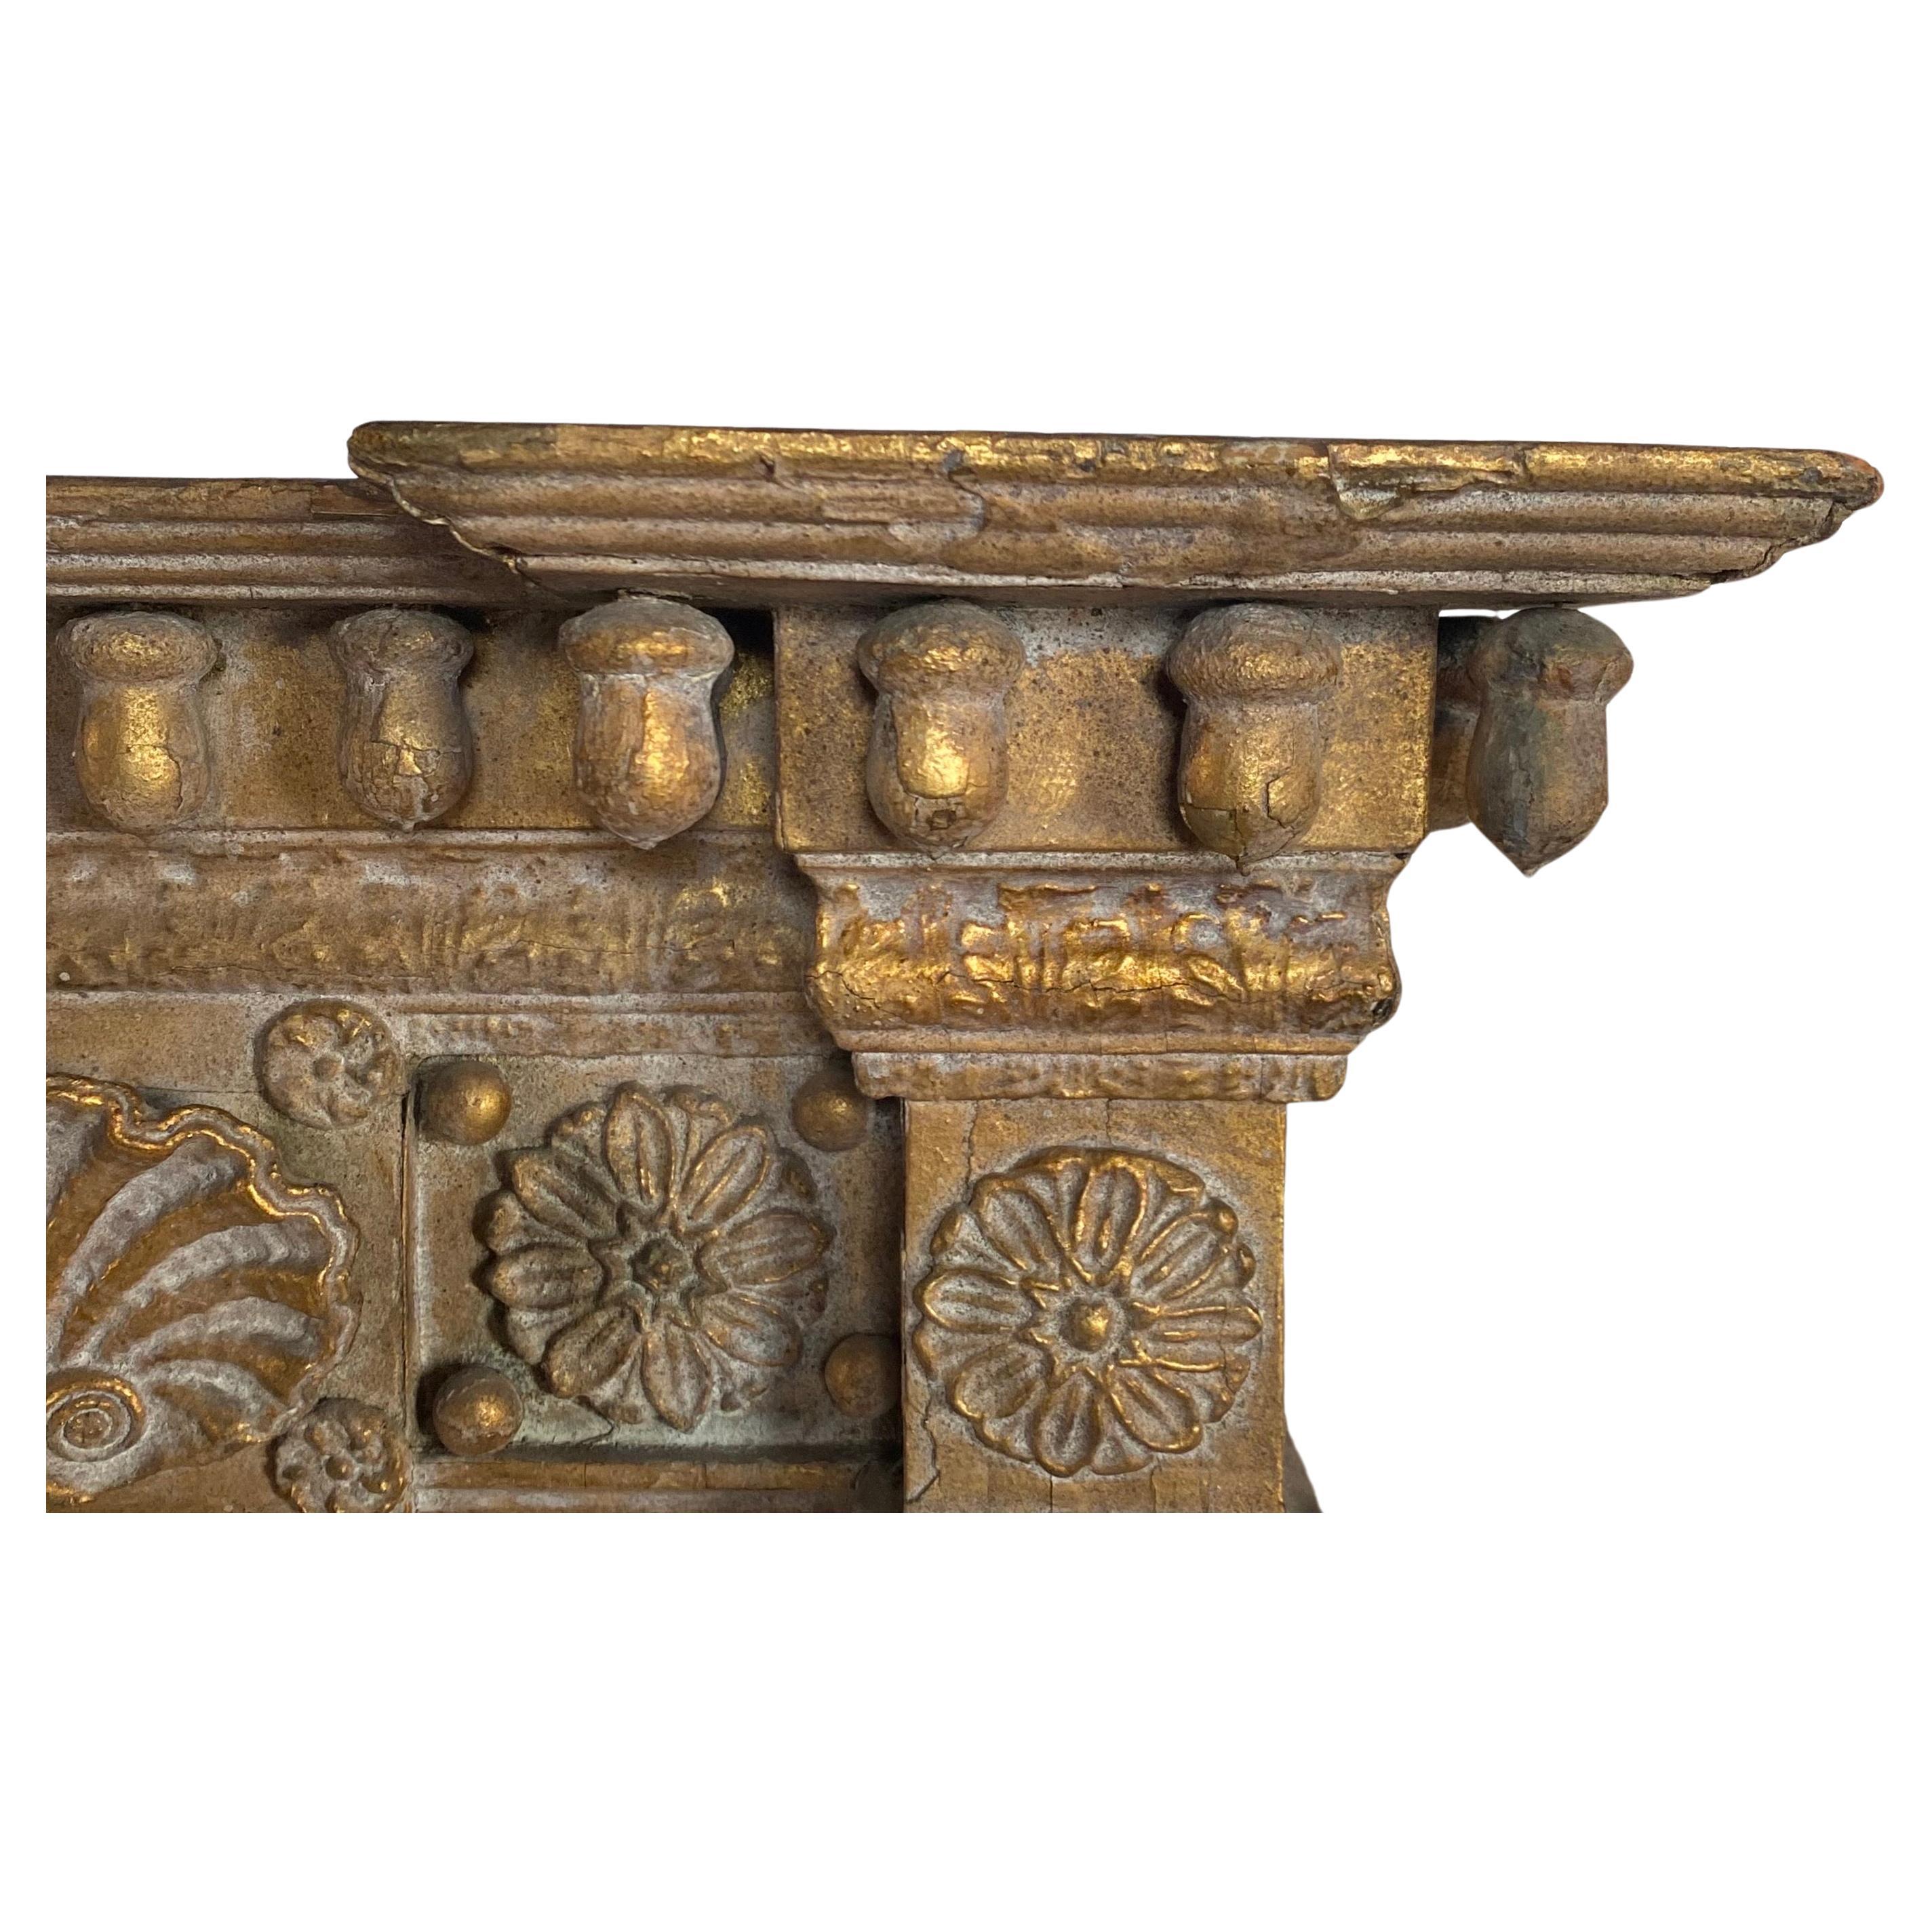 Stunning Antique American Classical gilt carved wood empire mirror, Early 19th C.  This tall detailed wall pier mirror features decorative carved acorns, a shell frieze, flanking twisted rope column motifs, and a dimensional stepped pediment. 